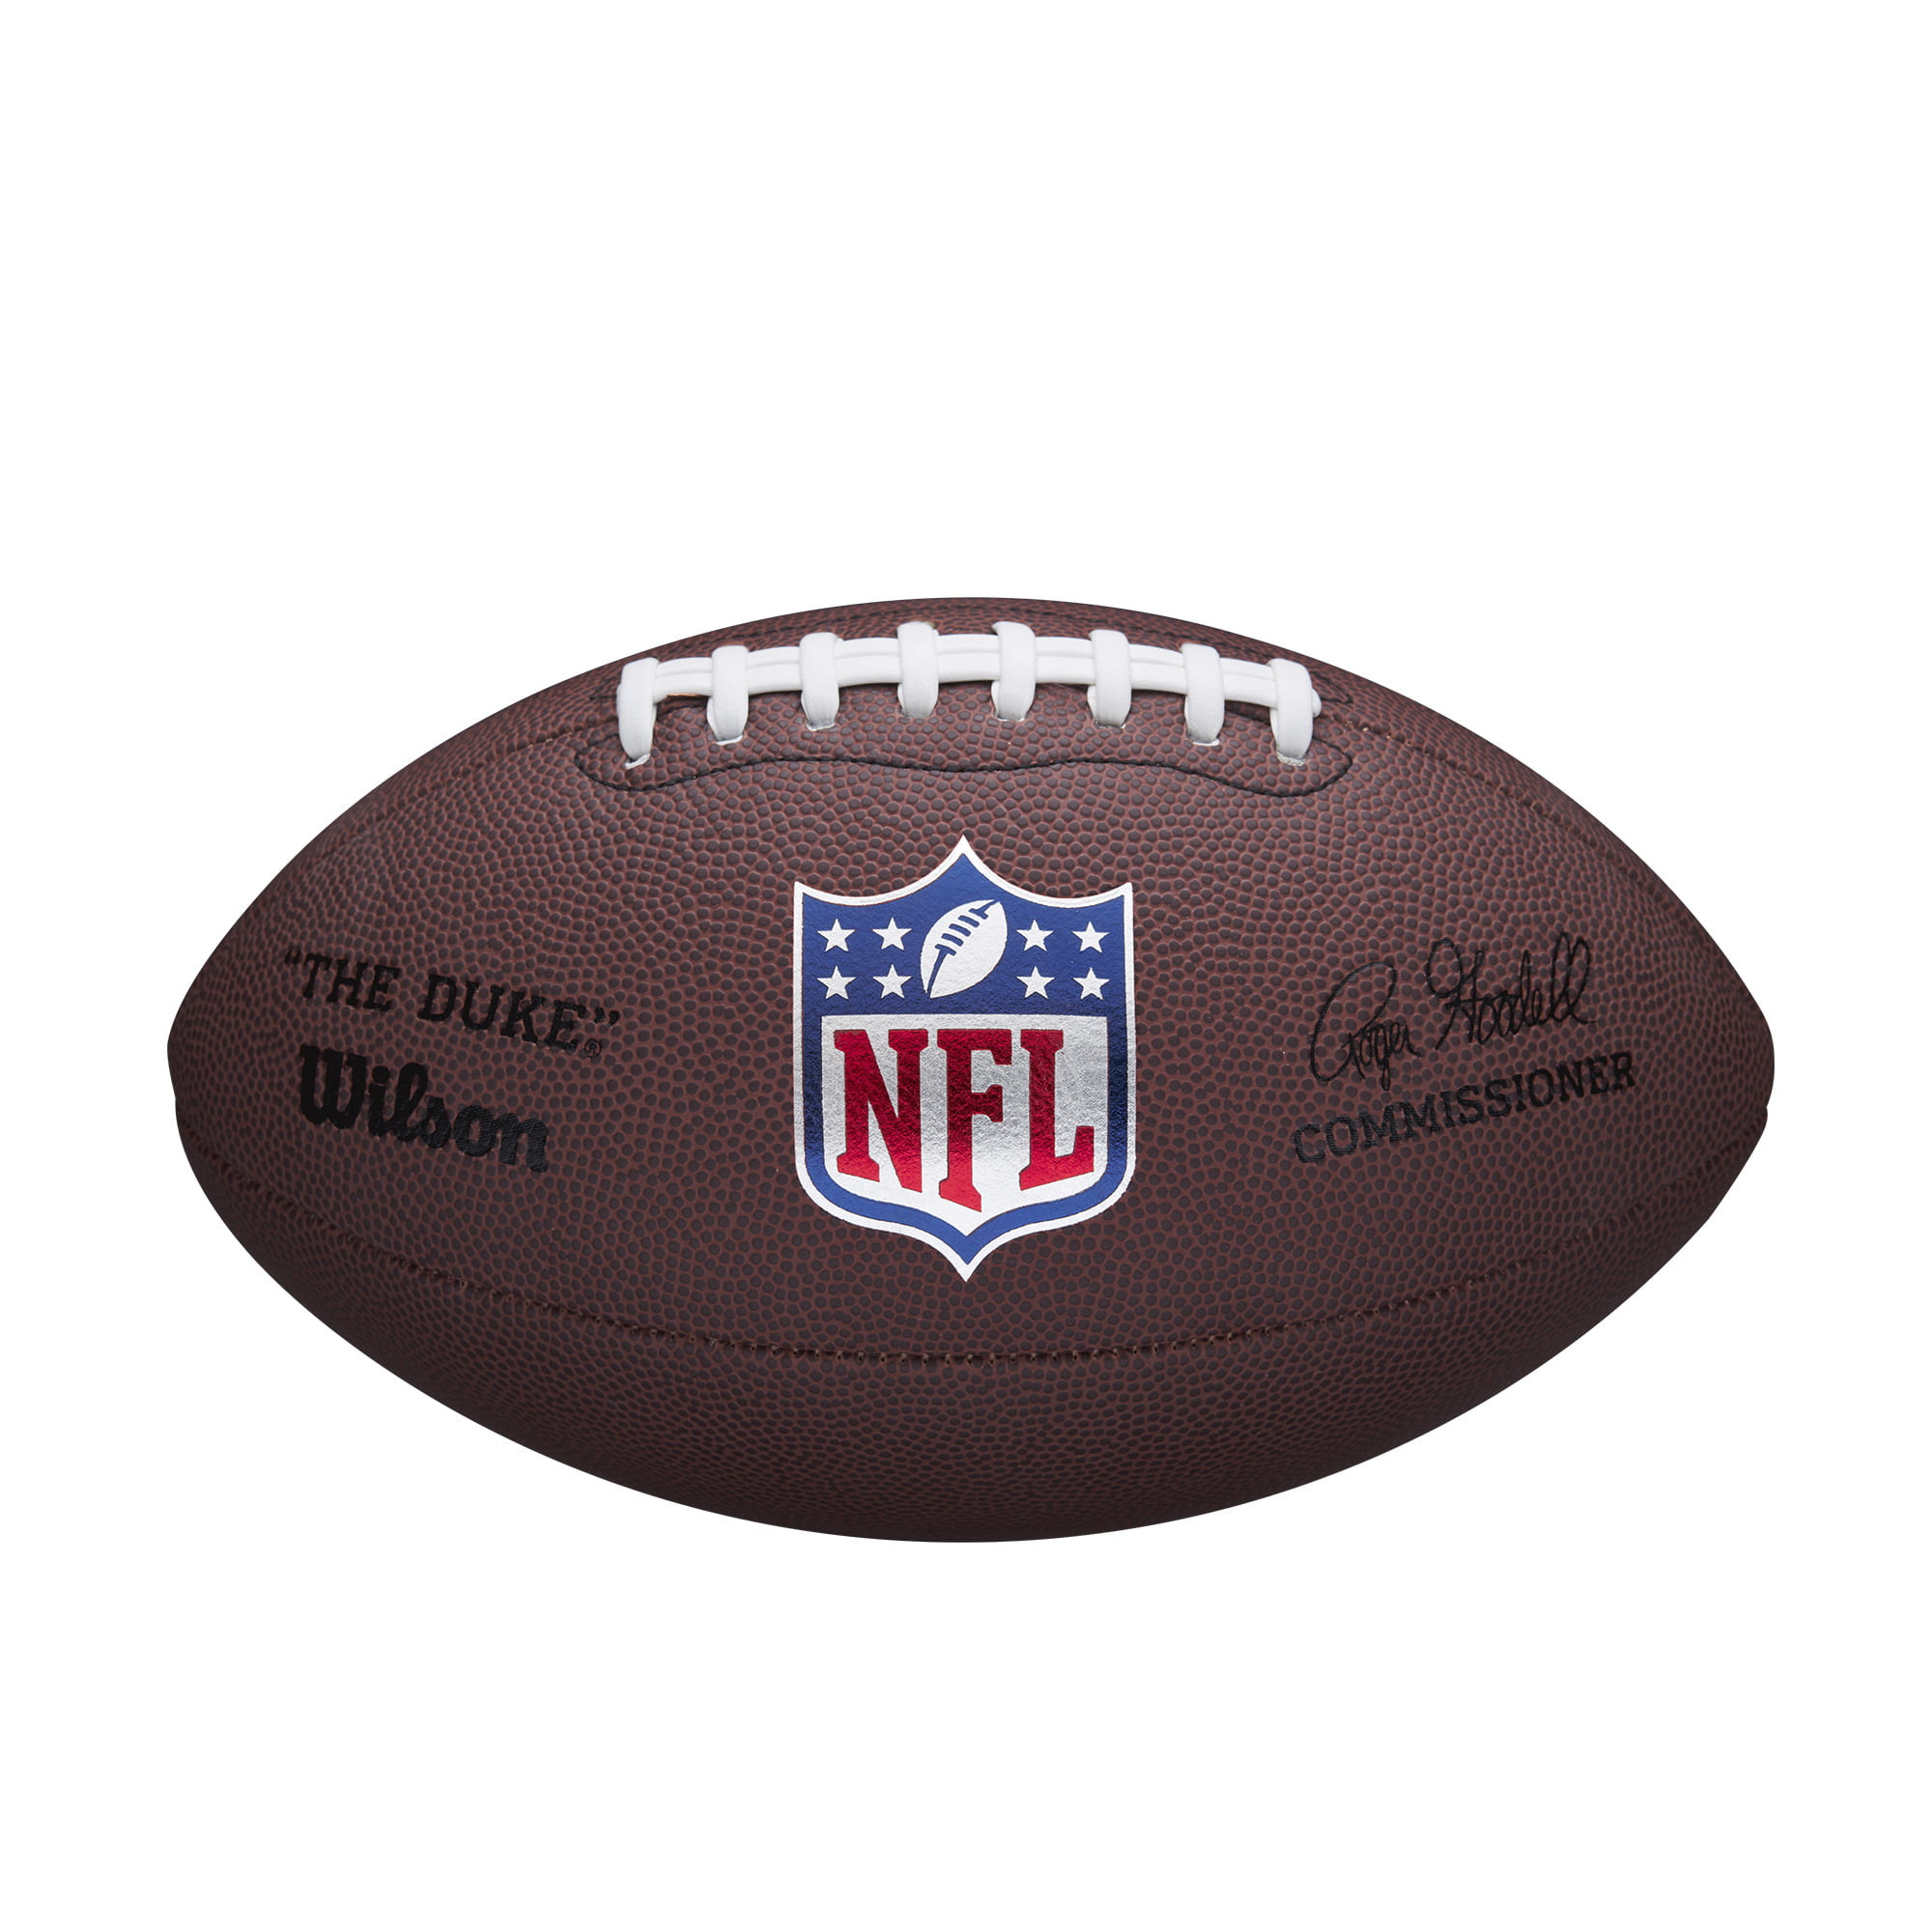 Wilson NFL 'The Duke' Replica Football, Official Size Ages 14 and up 